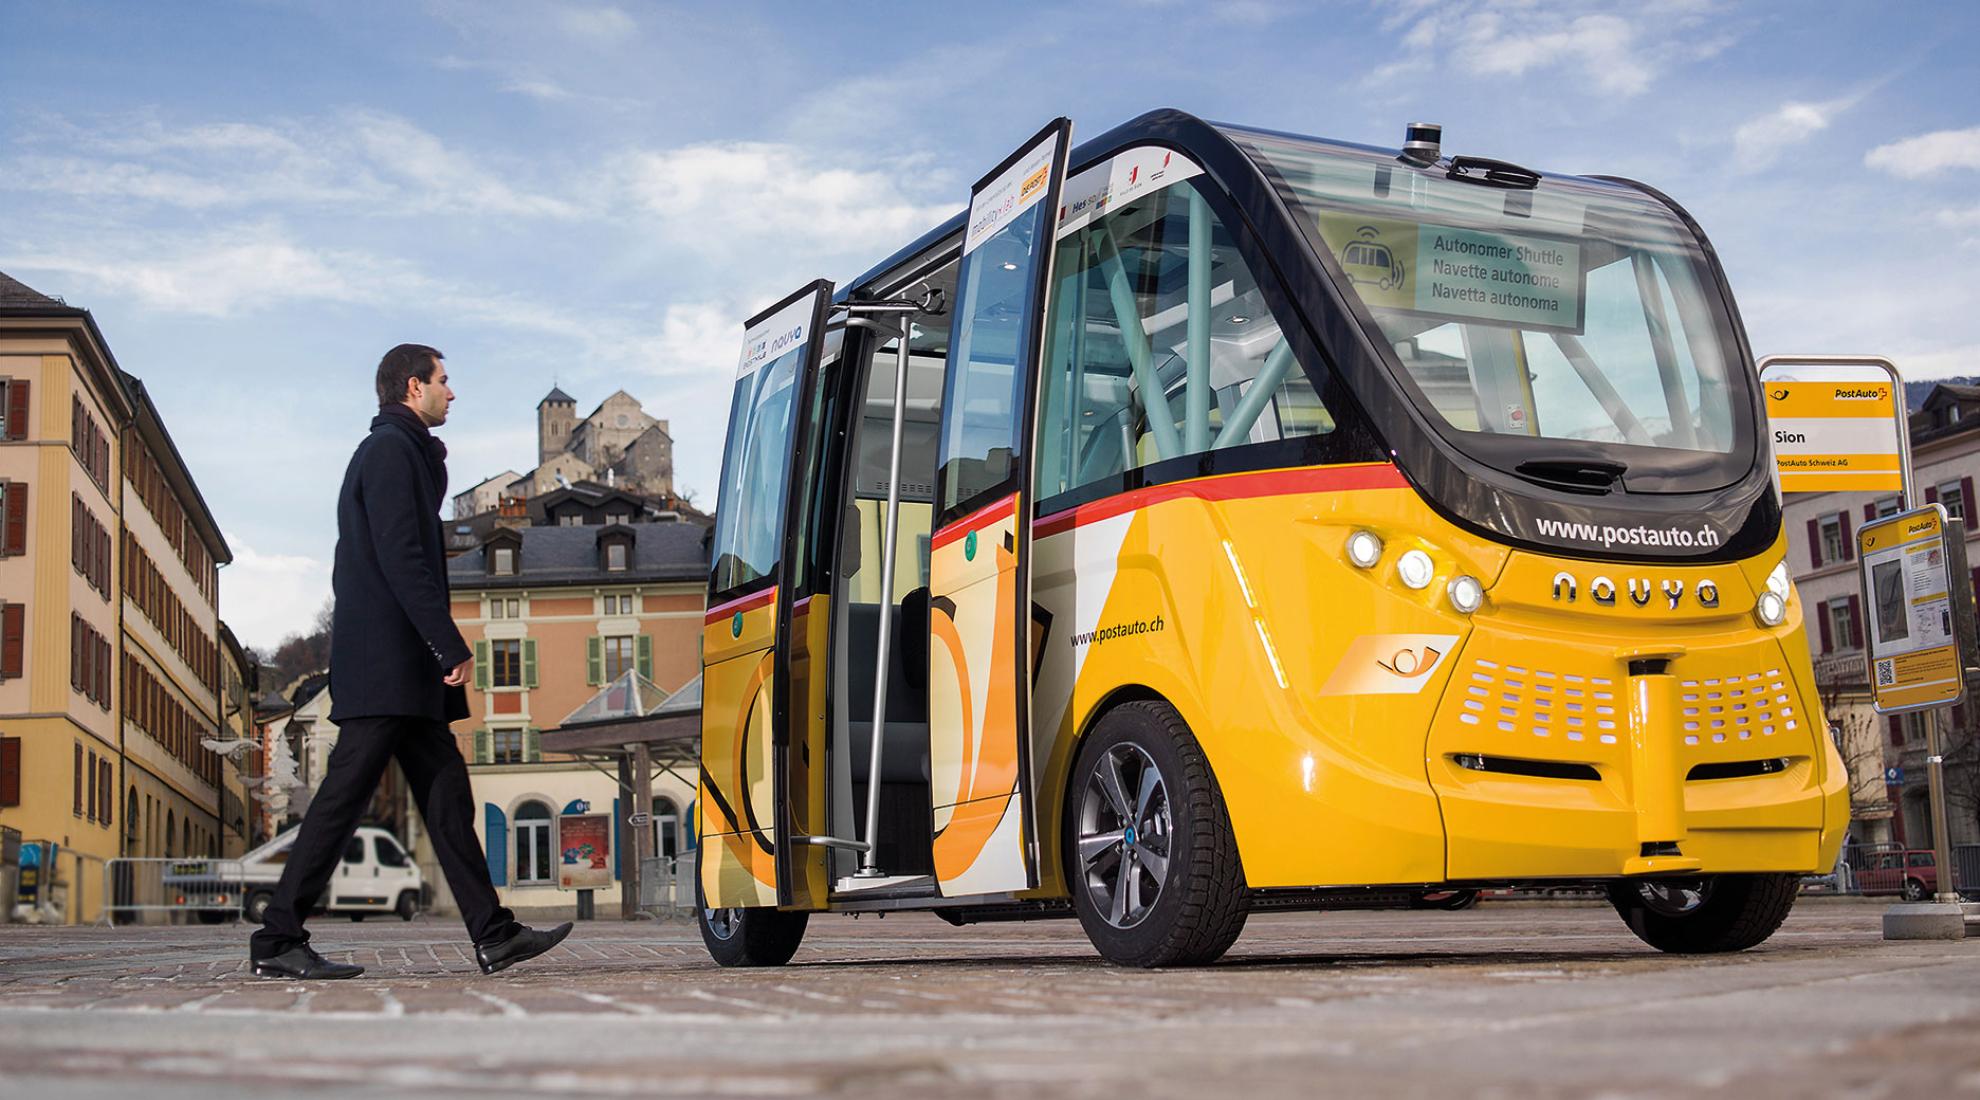 The first autonomous bus shuttles ran in the Swiss city of Sion between 2016 and 2019